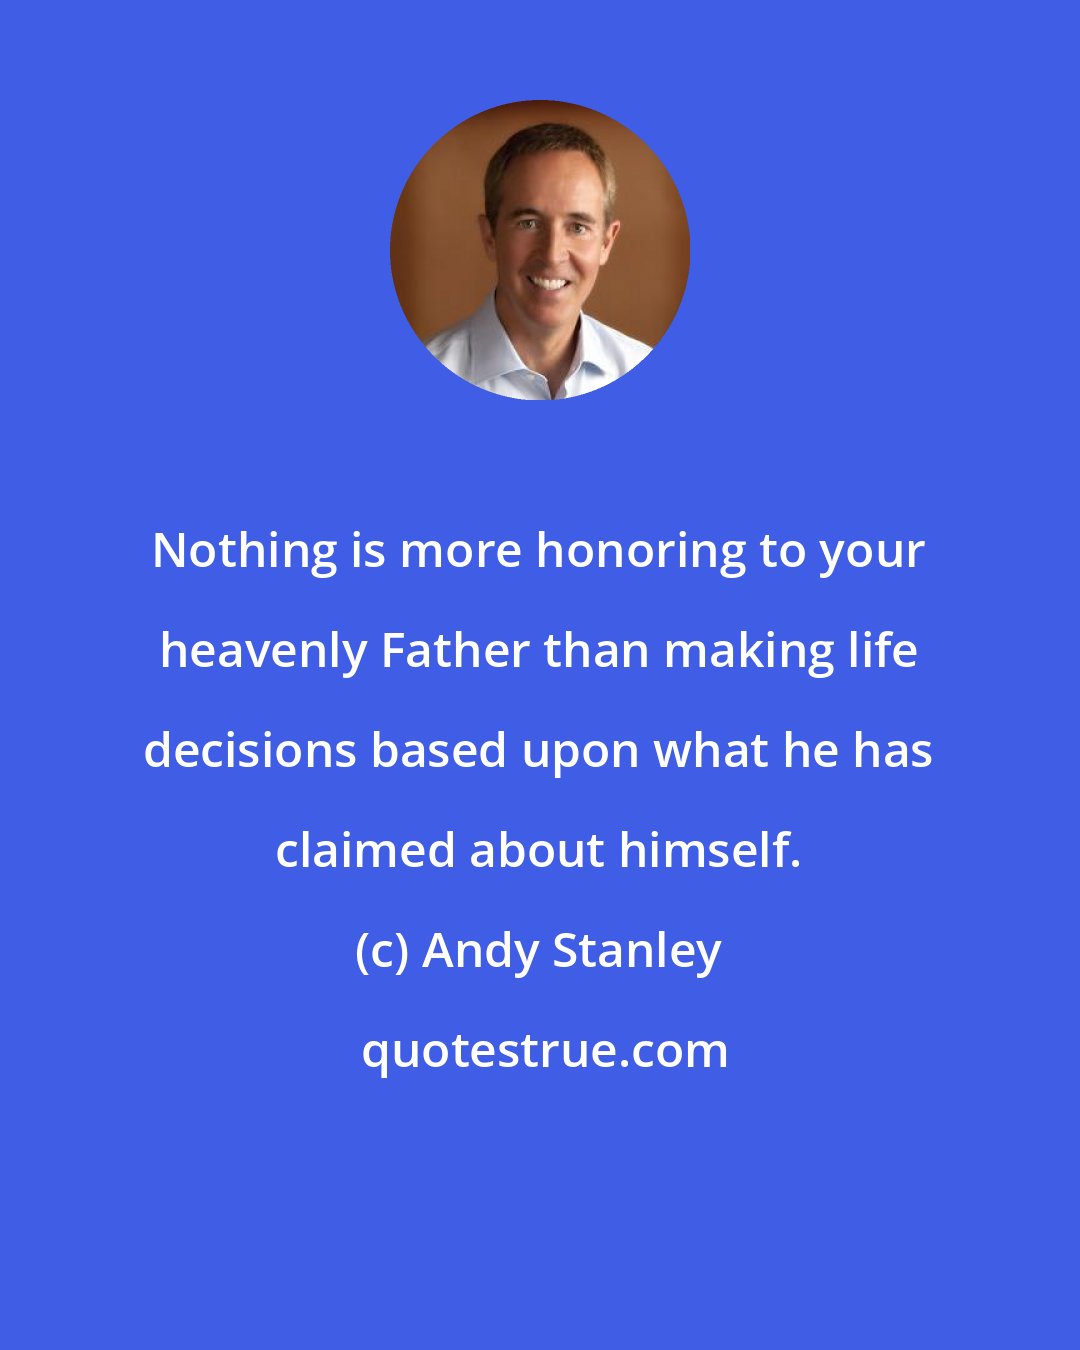 Andy Stanley: Nothing is more honoring to your heavenly Father than making life decisions based upon what he has claimed about himself.